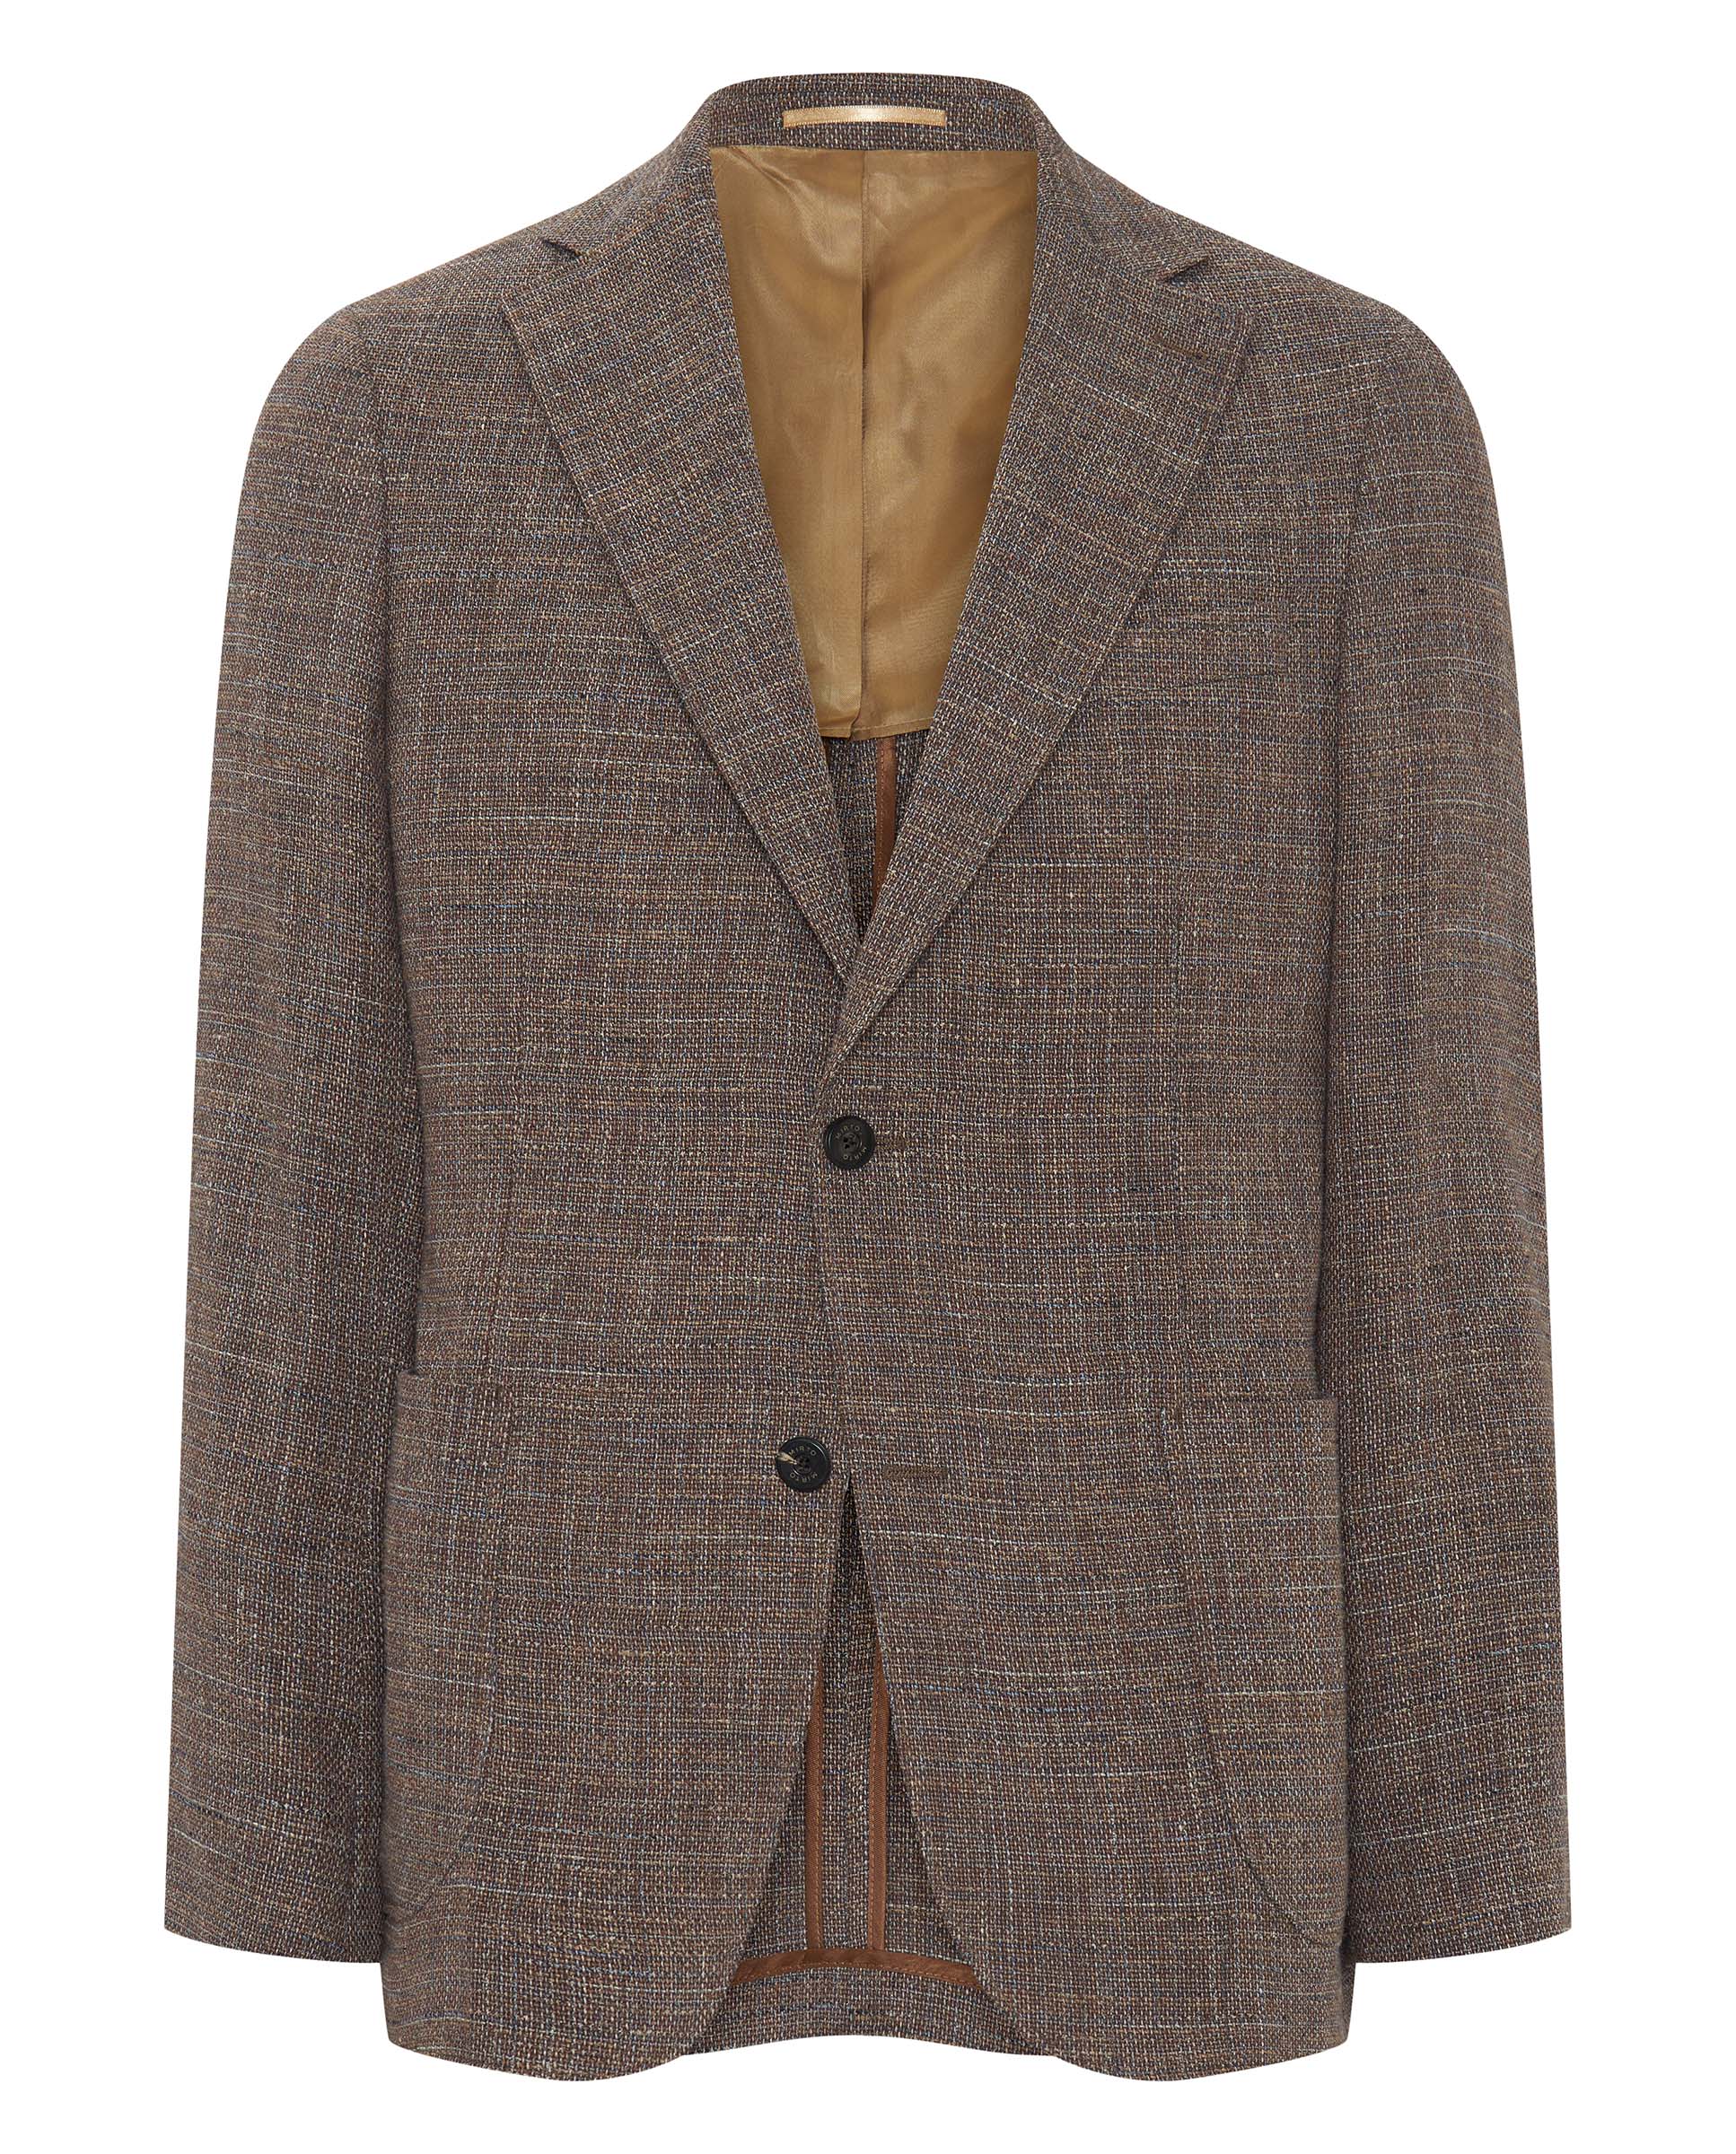 Brown coton & linen stretch blend jacket by MIRTO